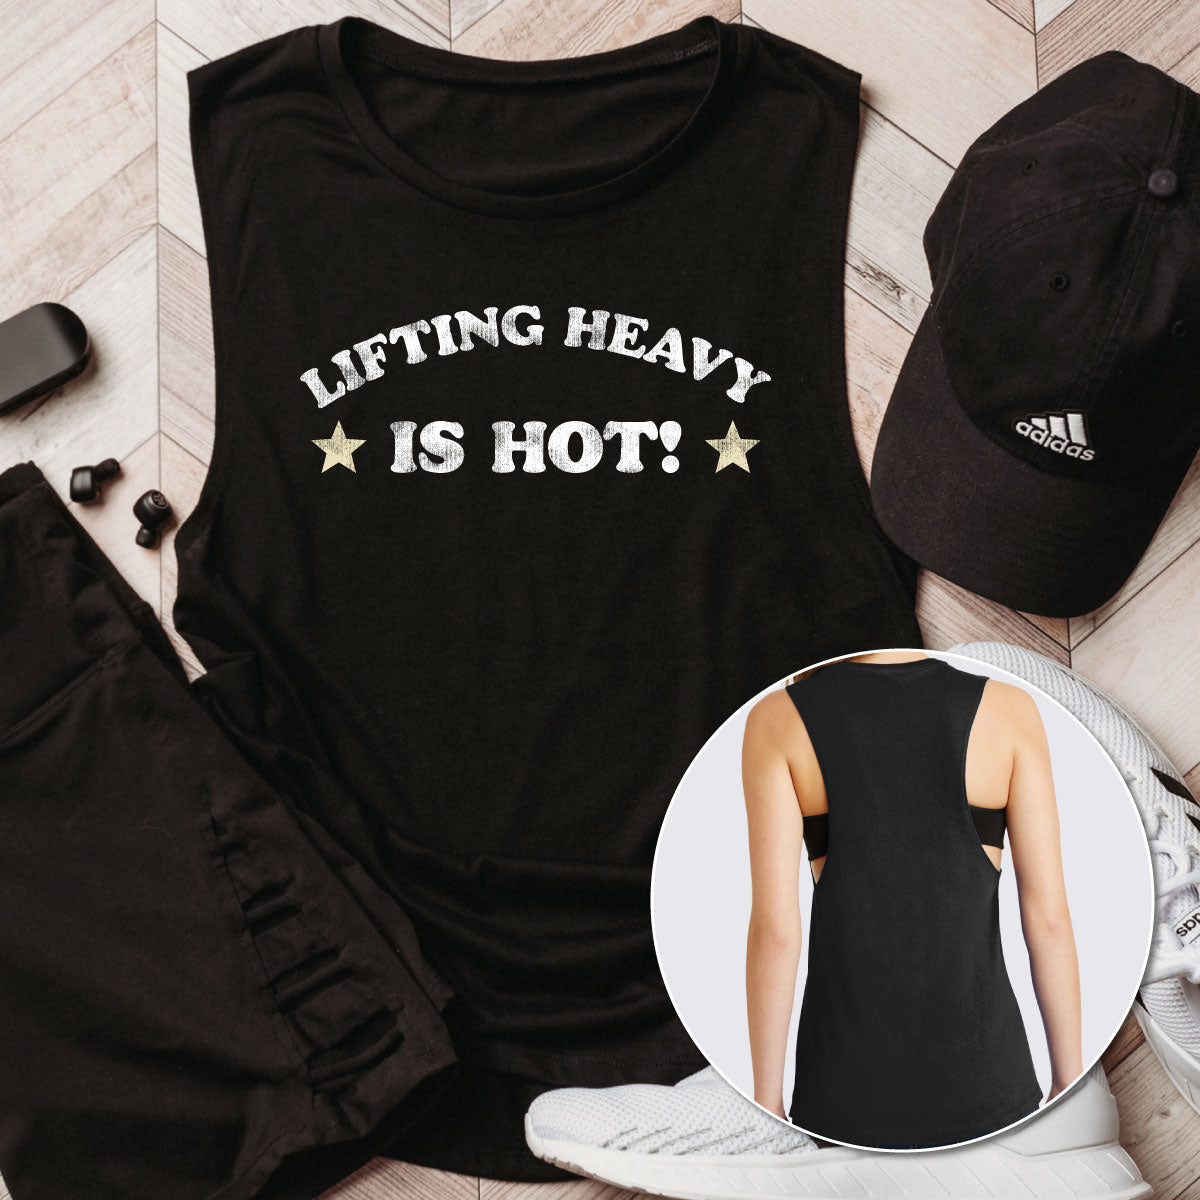 Lifting Heavy is Hot Women's Fitted V.I.T.™ Festival Tank - The LFT  Clothing Company